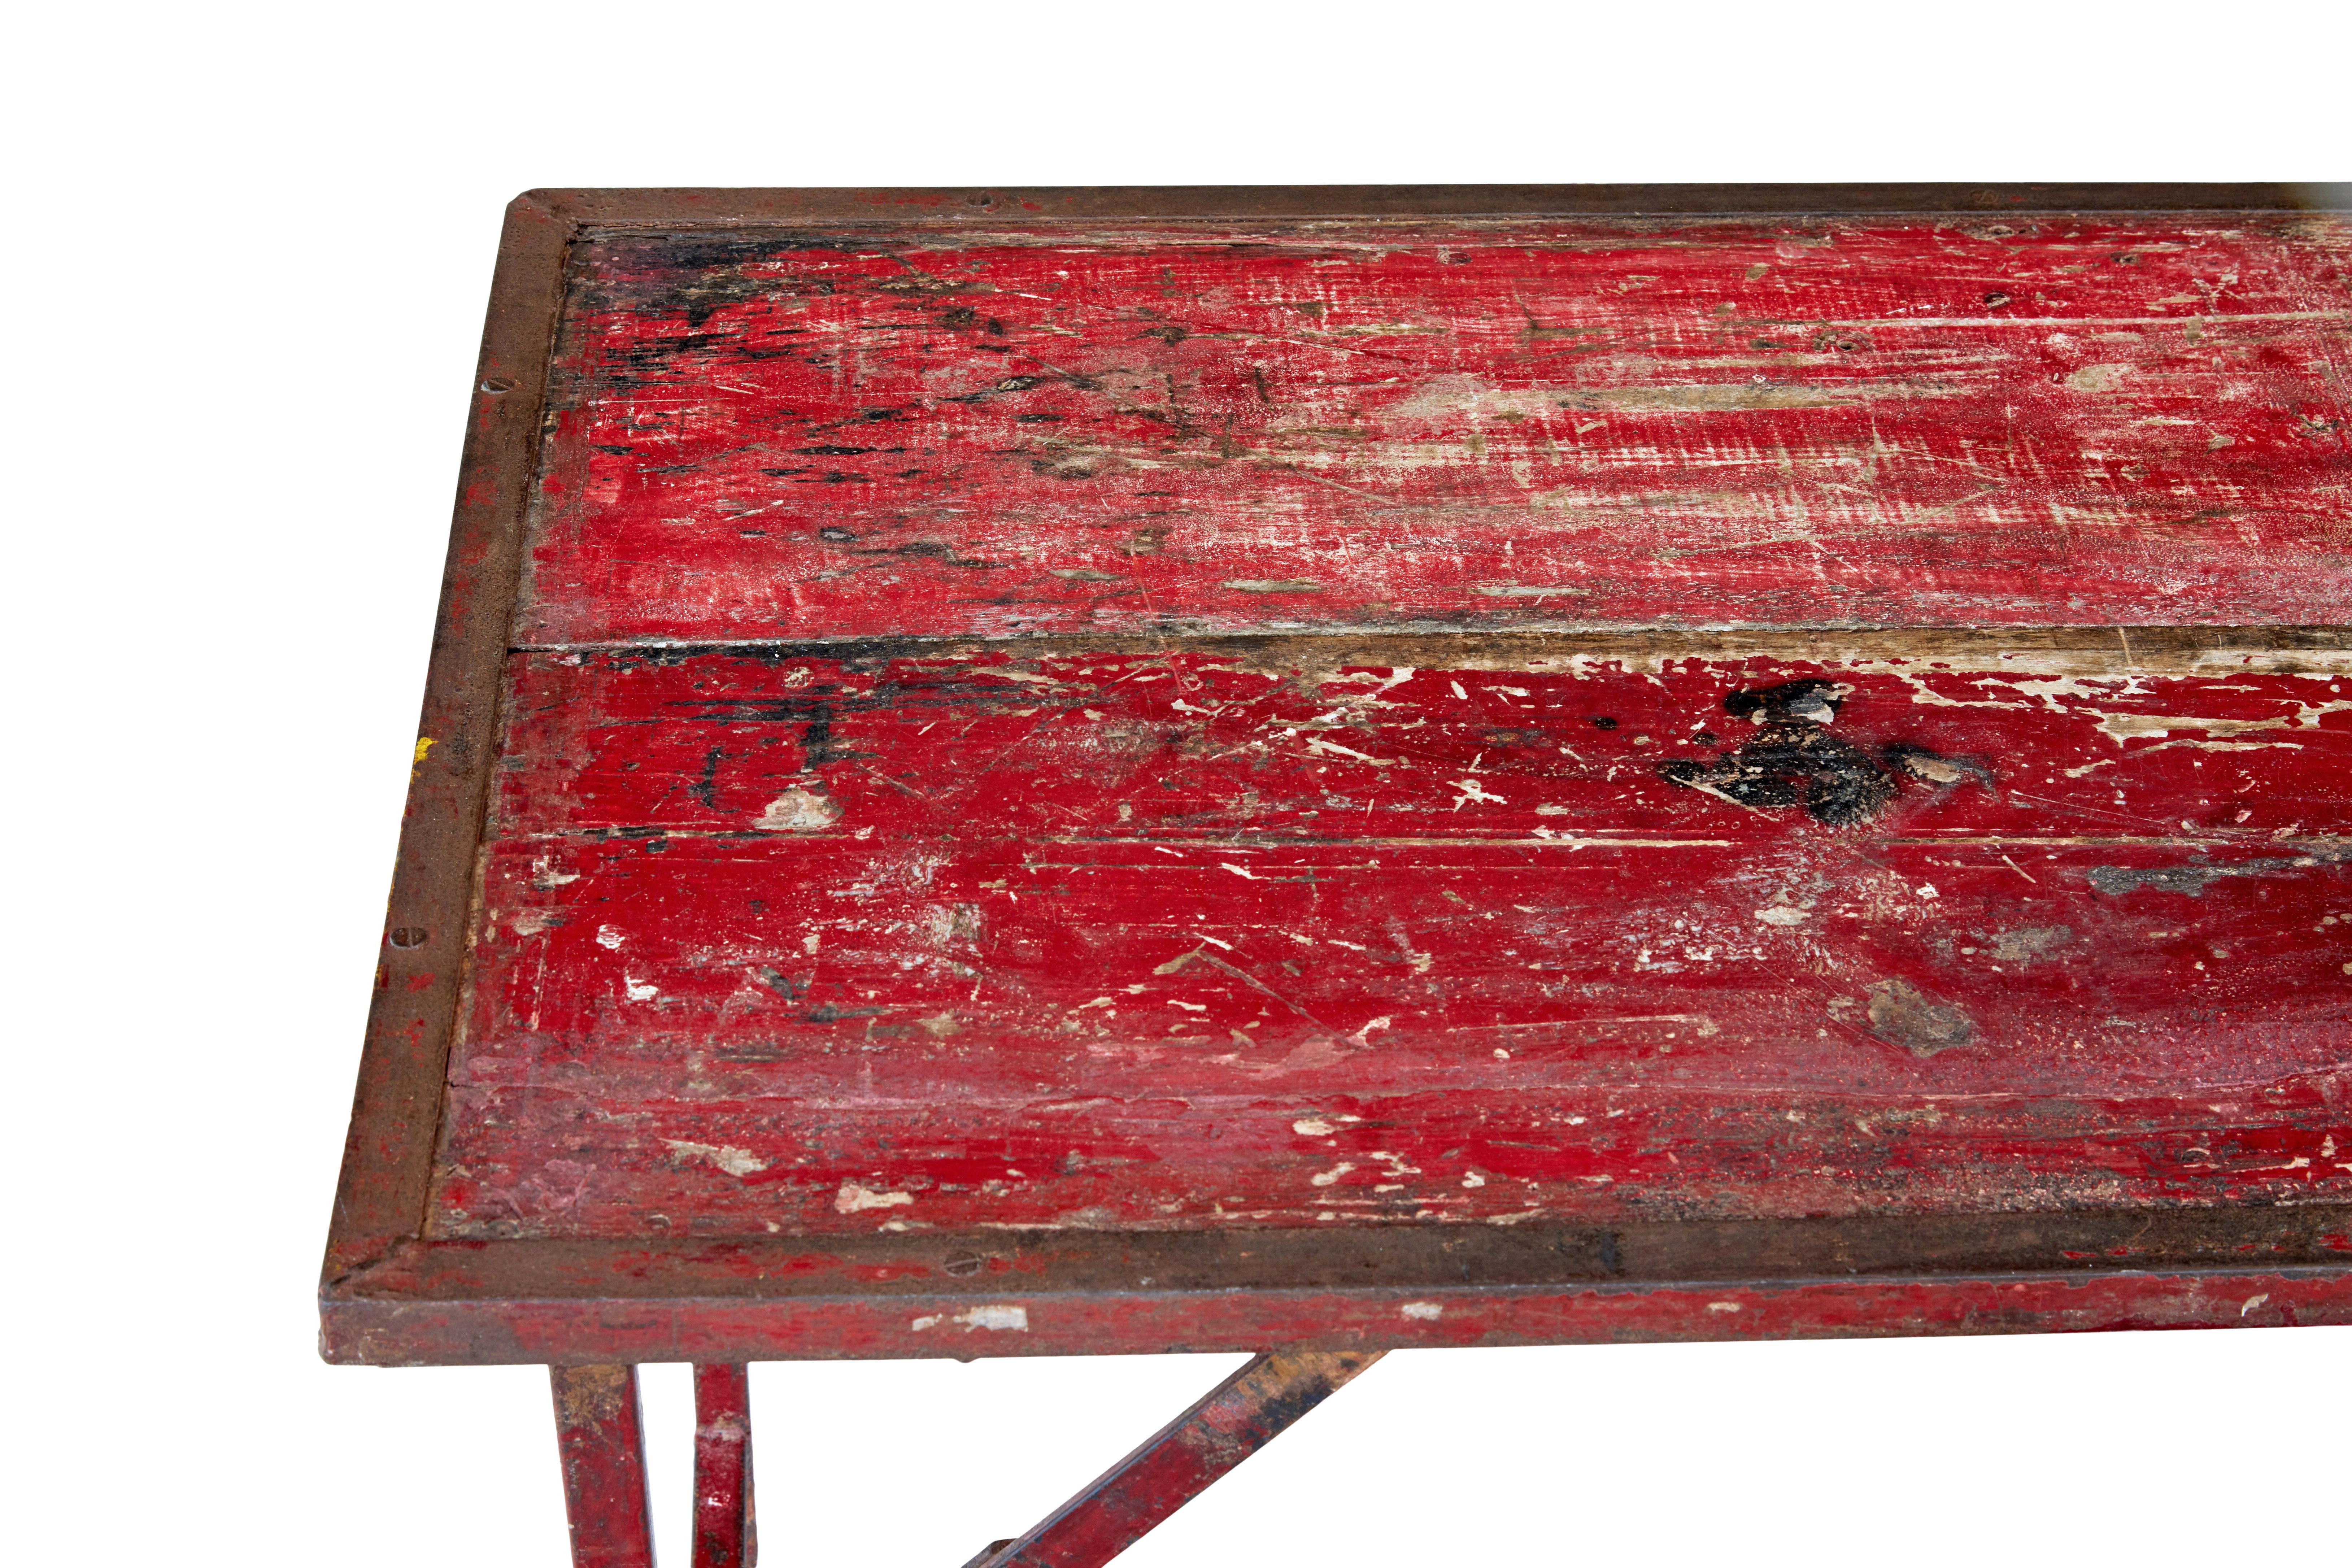 1920s' painted french pine and metal folding table circa 1920.

Beautiful and practical folding table in it's original paint.

Rectangular table top formed of 2 planks in metal frame, supported by a pair of foldable steel tubular legs.  Original